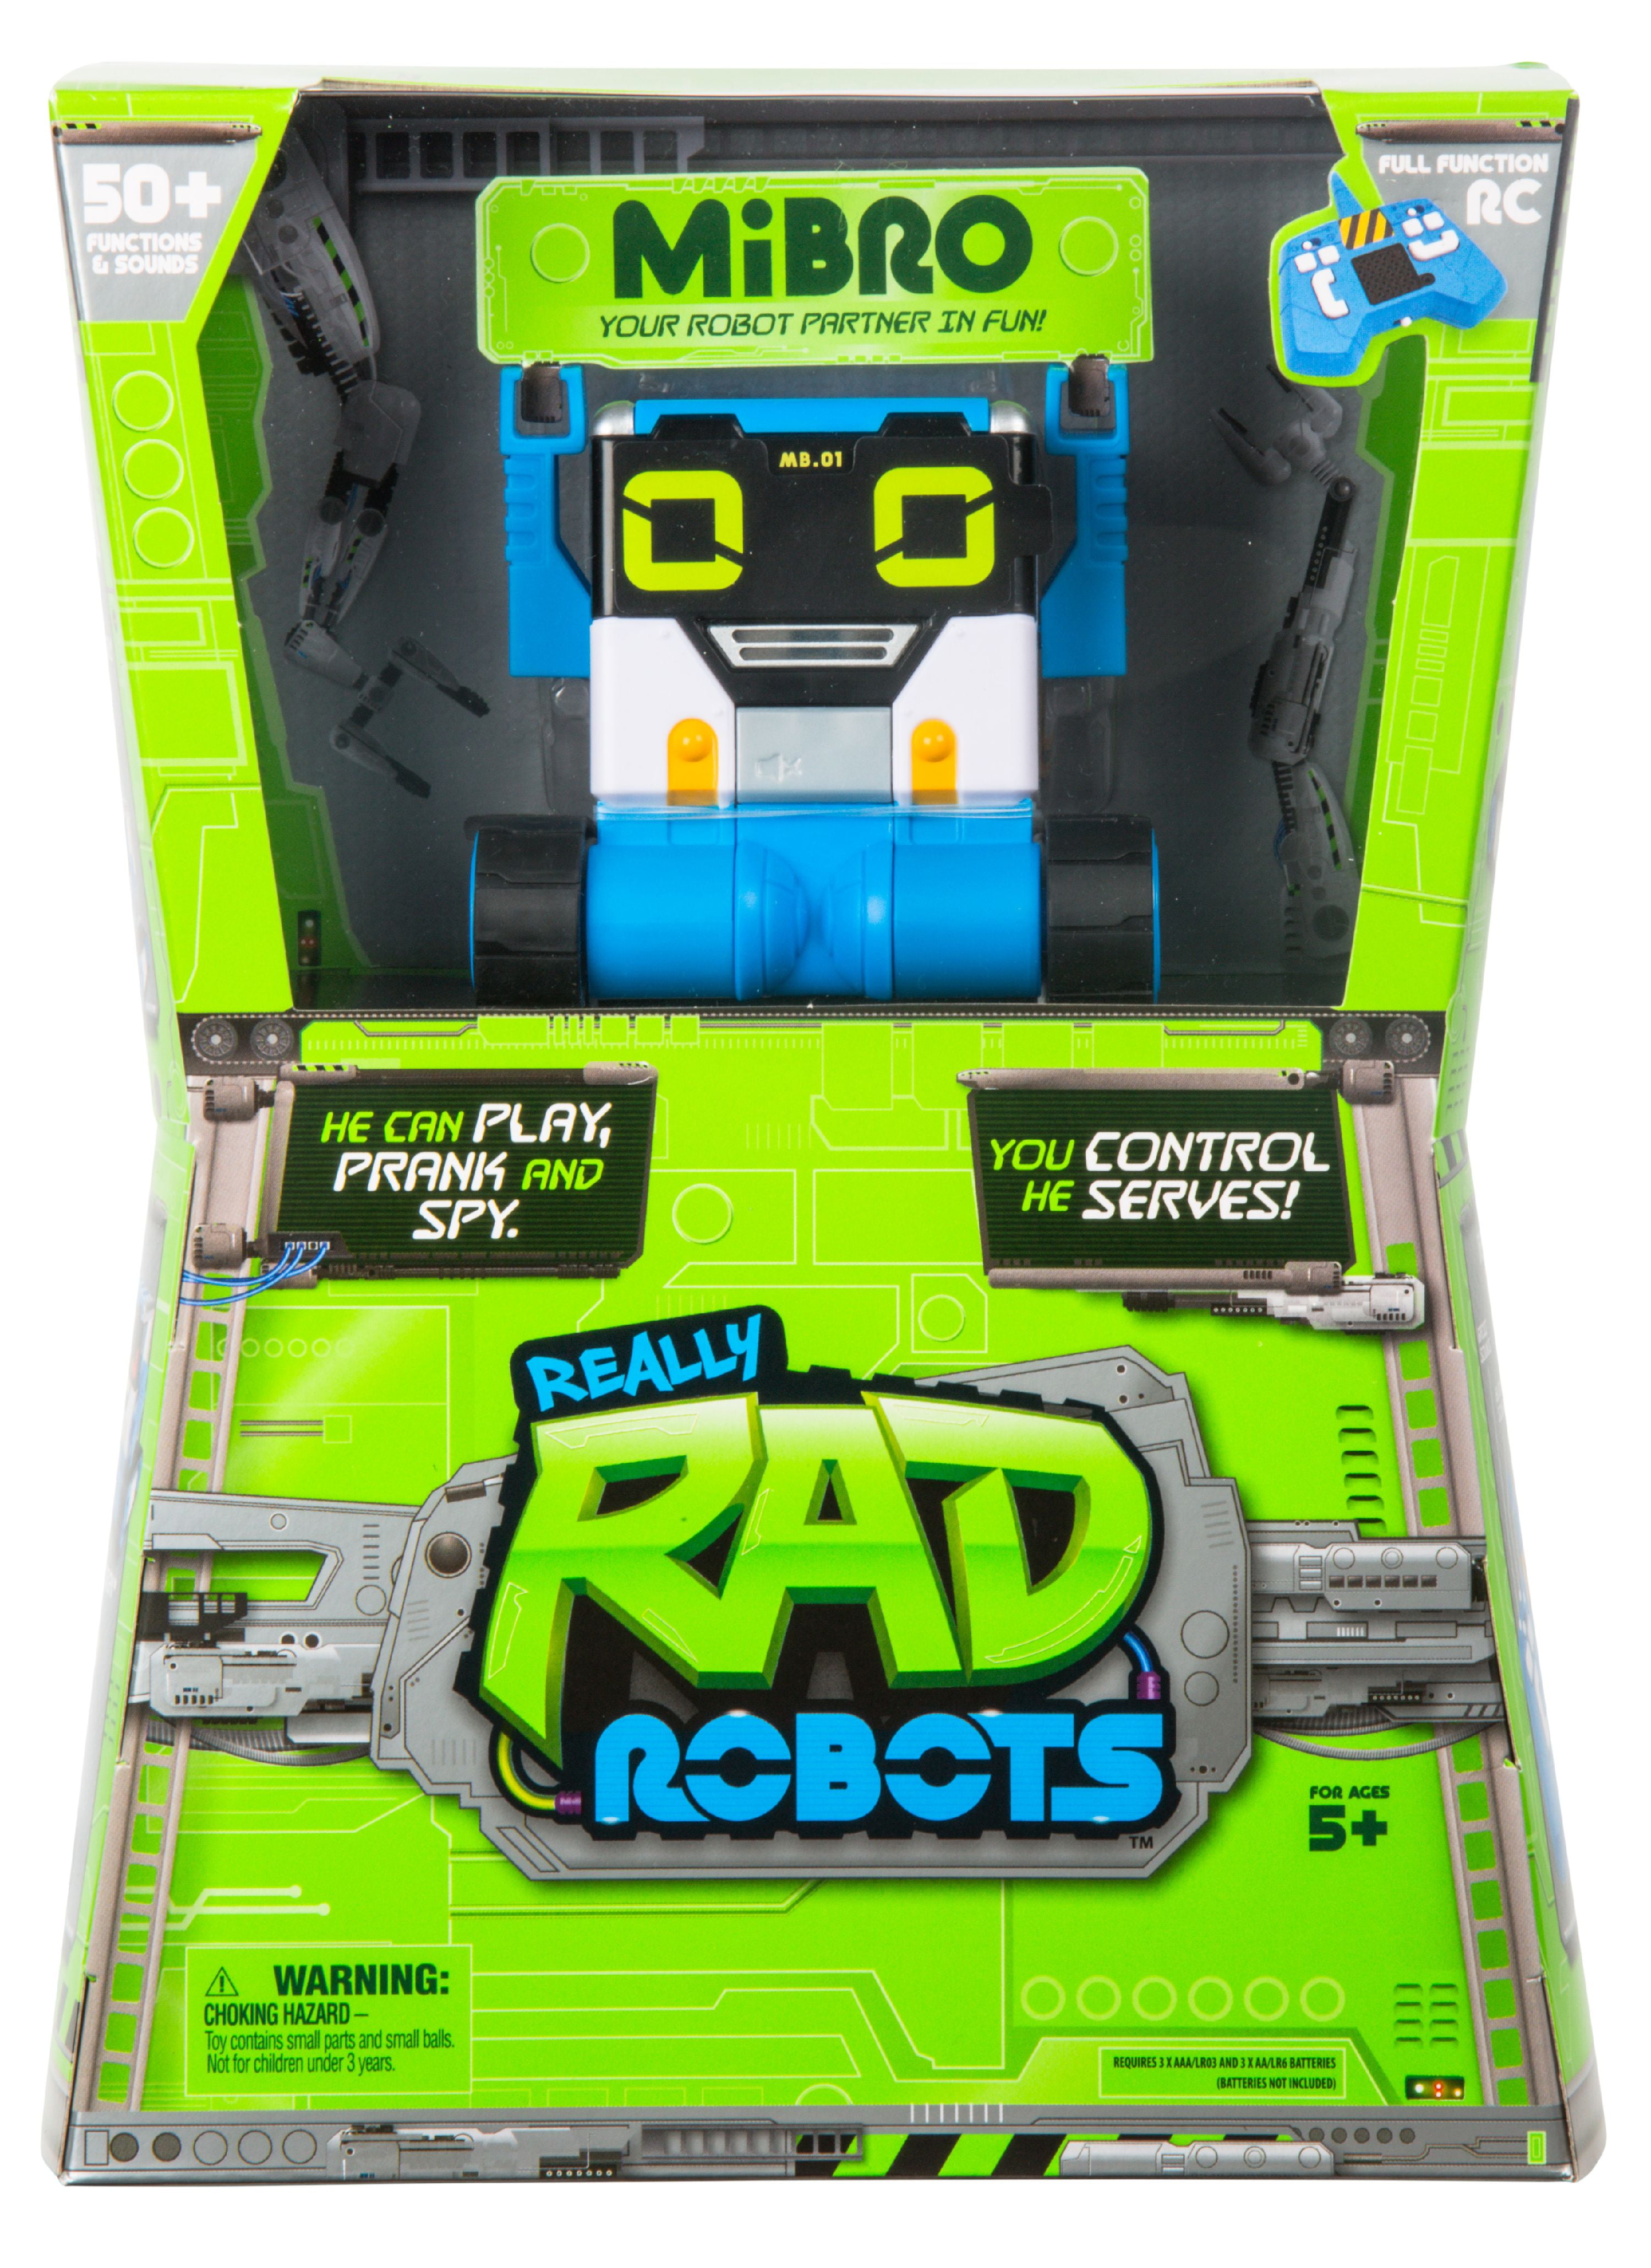 Robots 27805 Mibro Interactive Remote Control Robot for sale online Really R.A.D